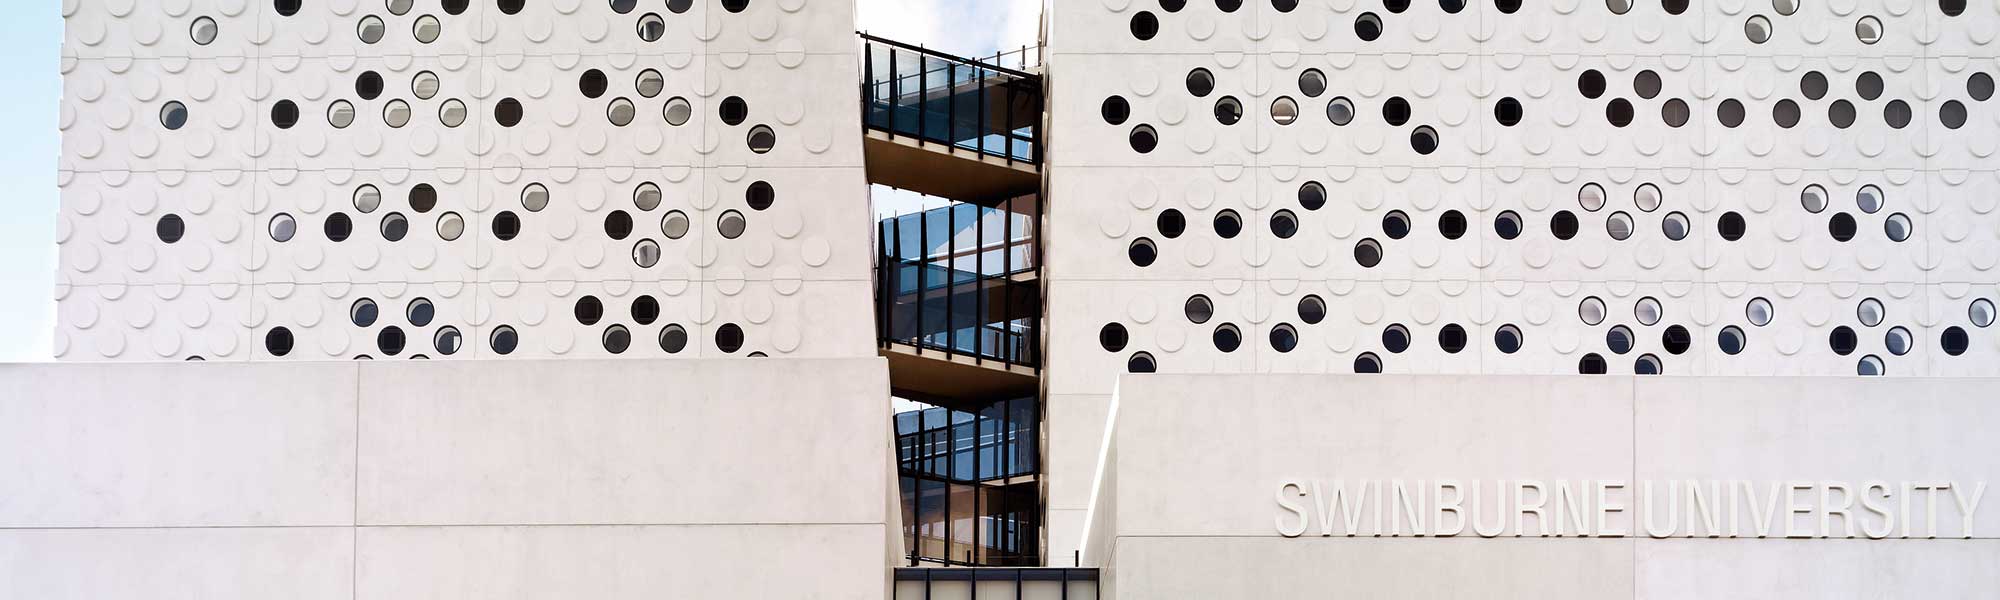 Close-up photo of a unique Swinburne building at the Hawthorn campus.